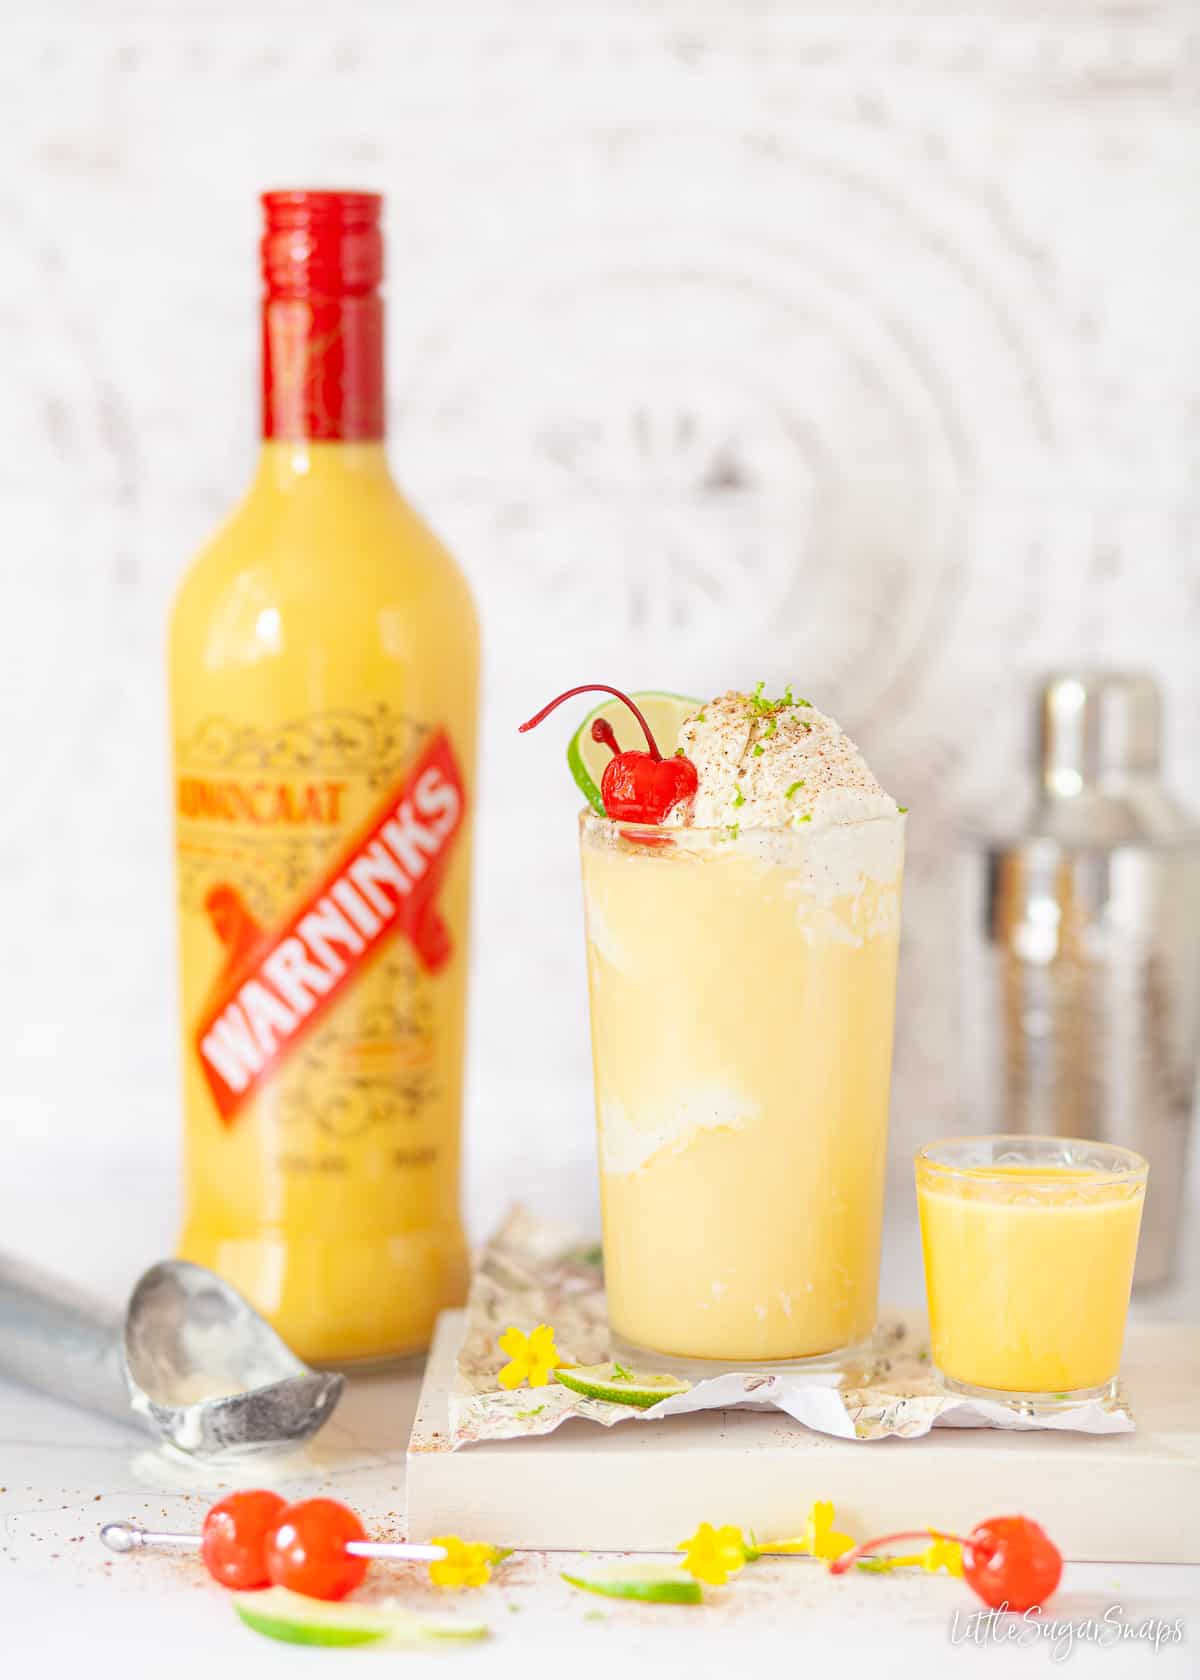 A bottle of advocaat and a snowball with ice cream.